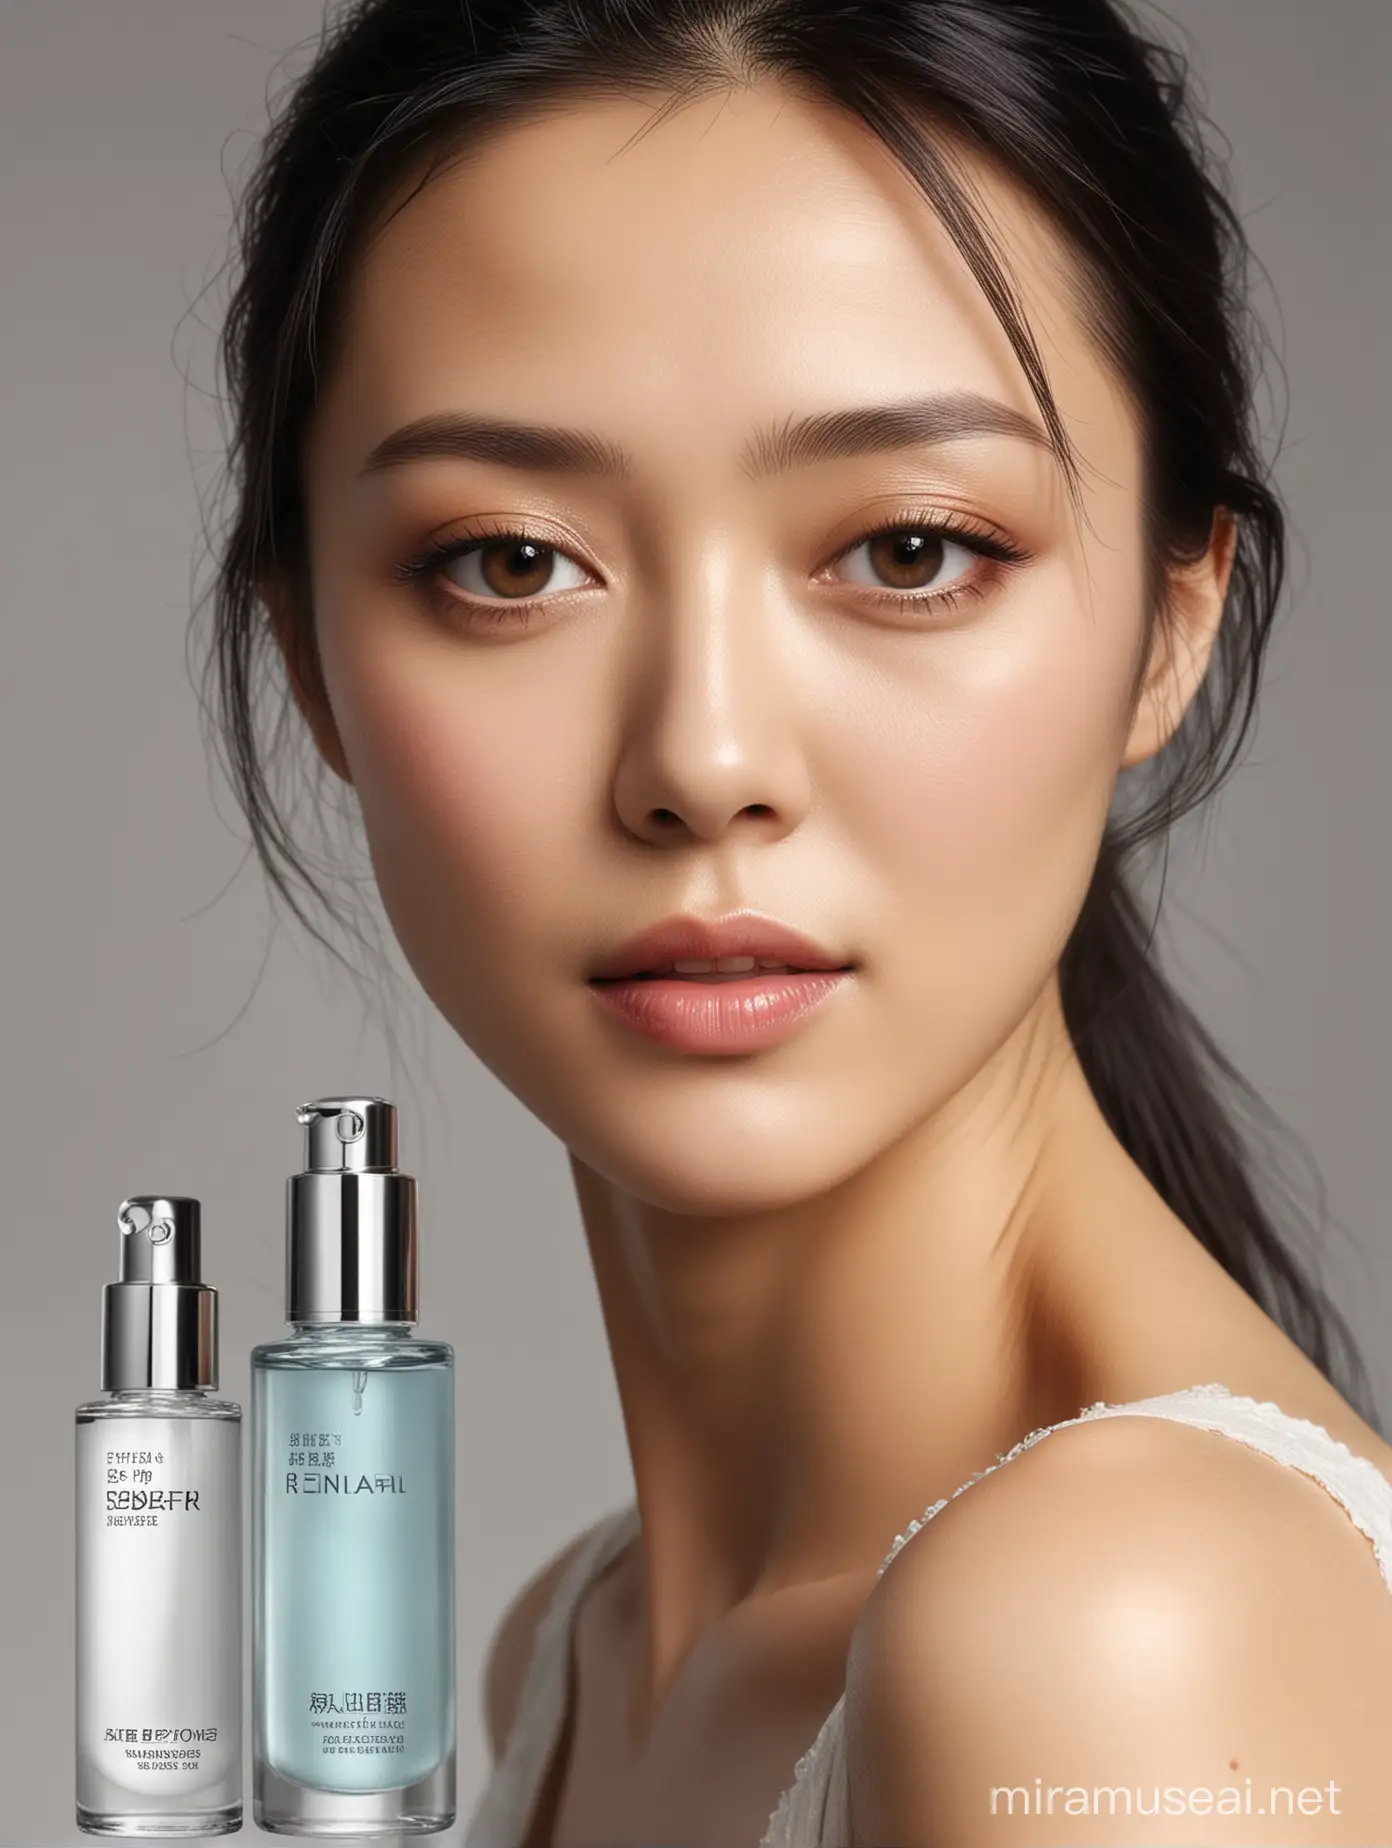 Tang Weis AgeDefying Beauty with SKII PITERA Essence